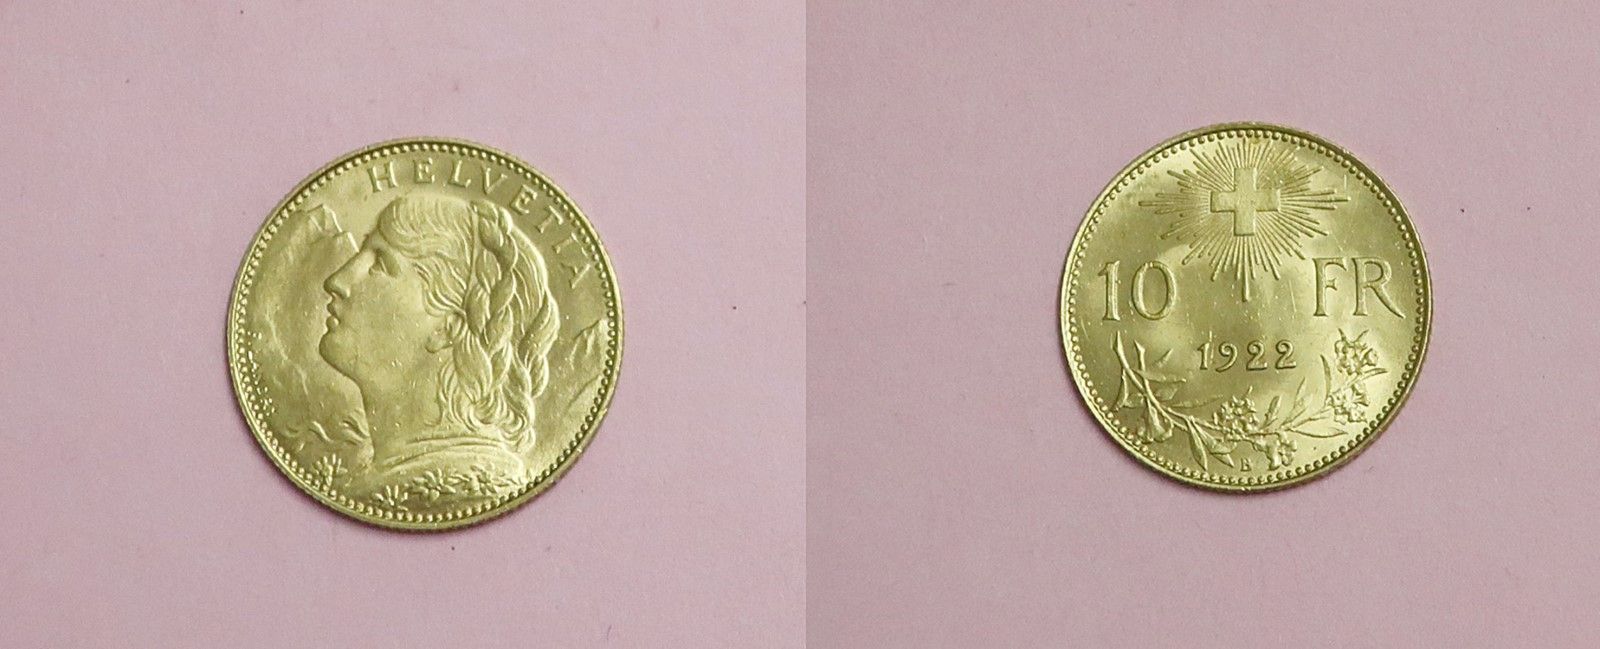 Null Gold coin Vreneli 10 Swiss francs, 1922, approx. 3.22 grams, 900 gold